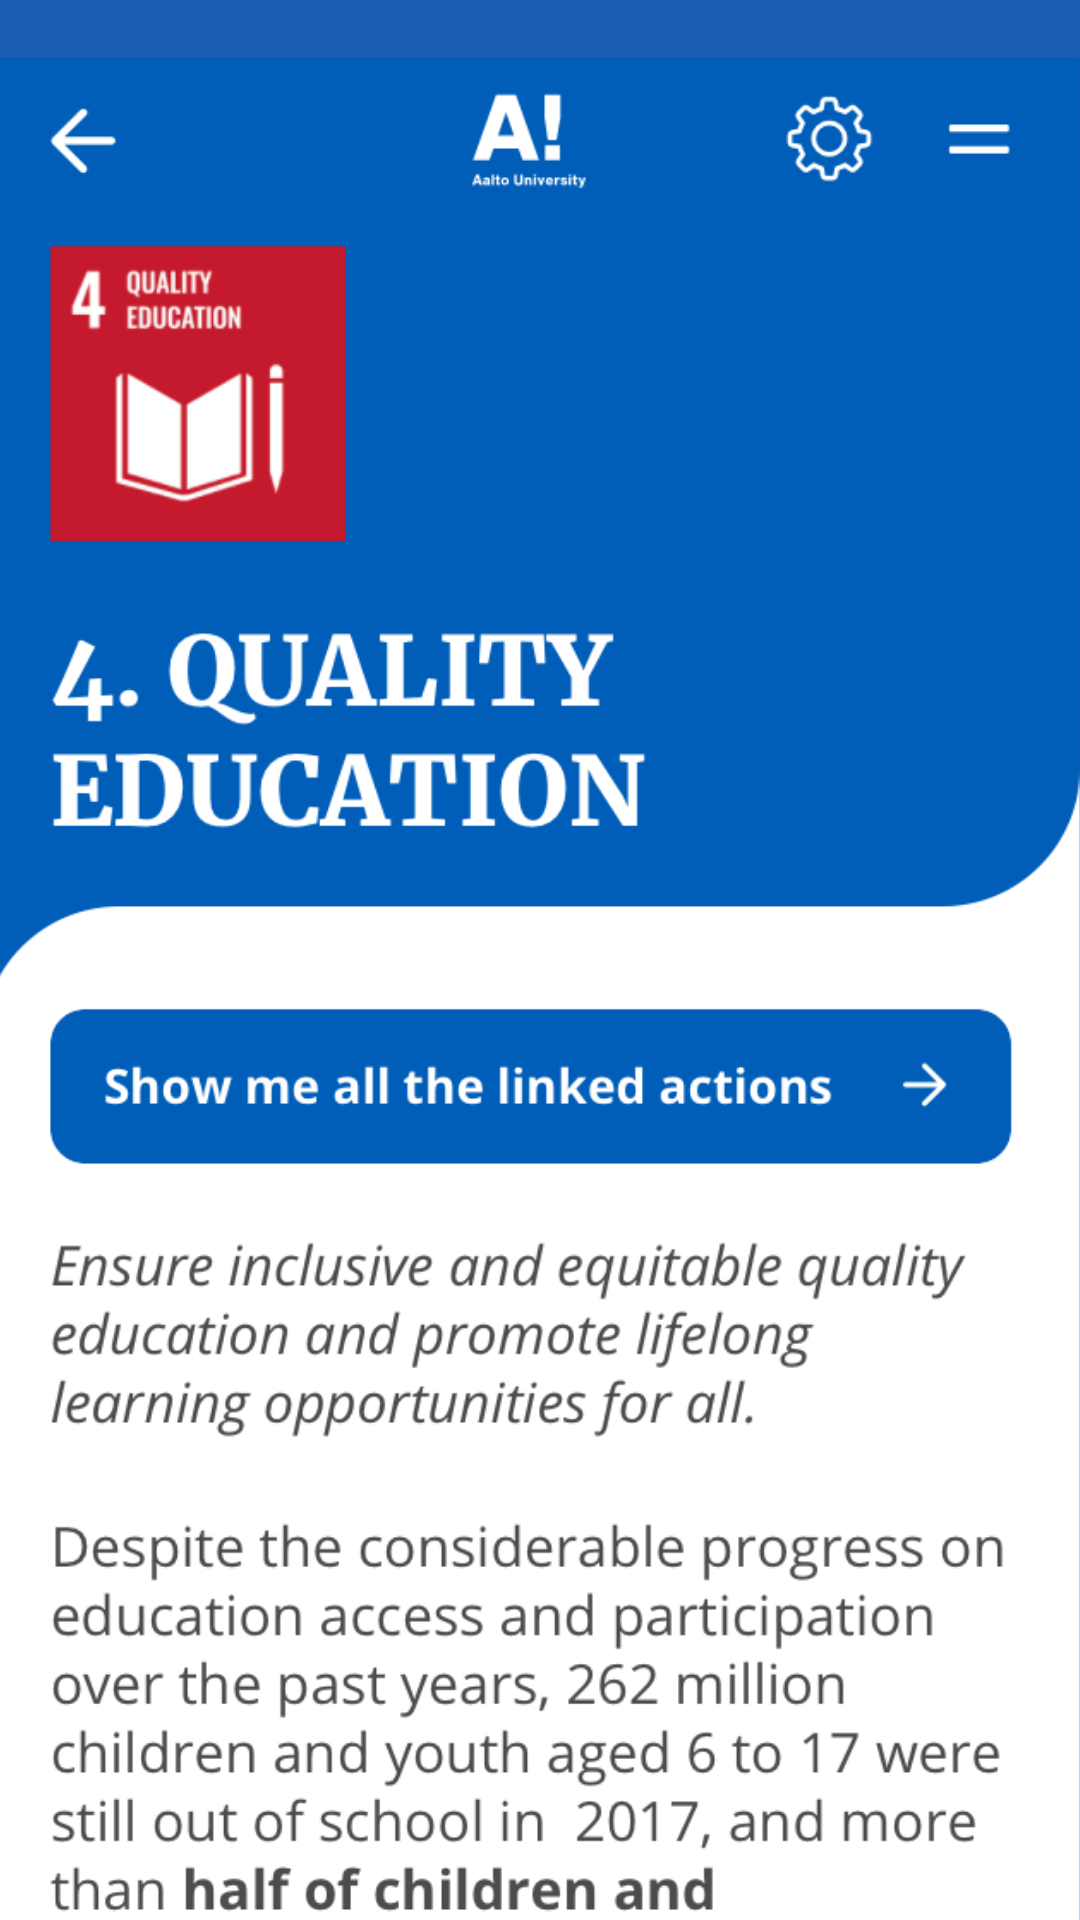 SDG number 4 - quality education